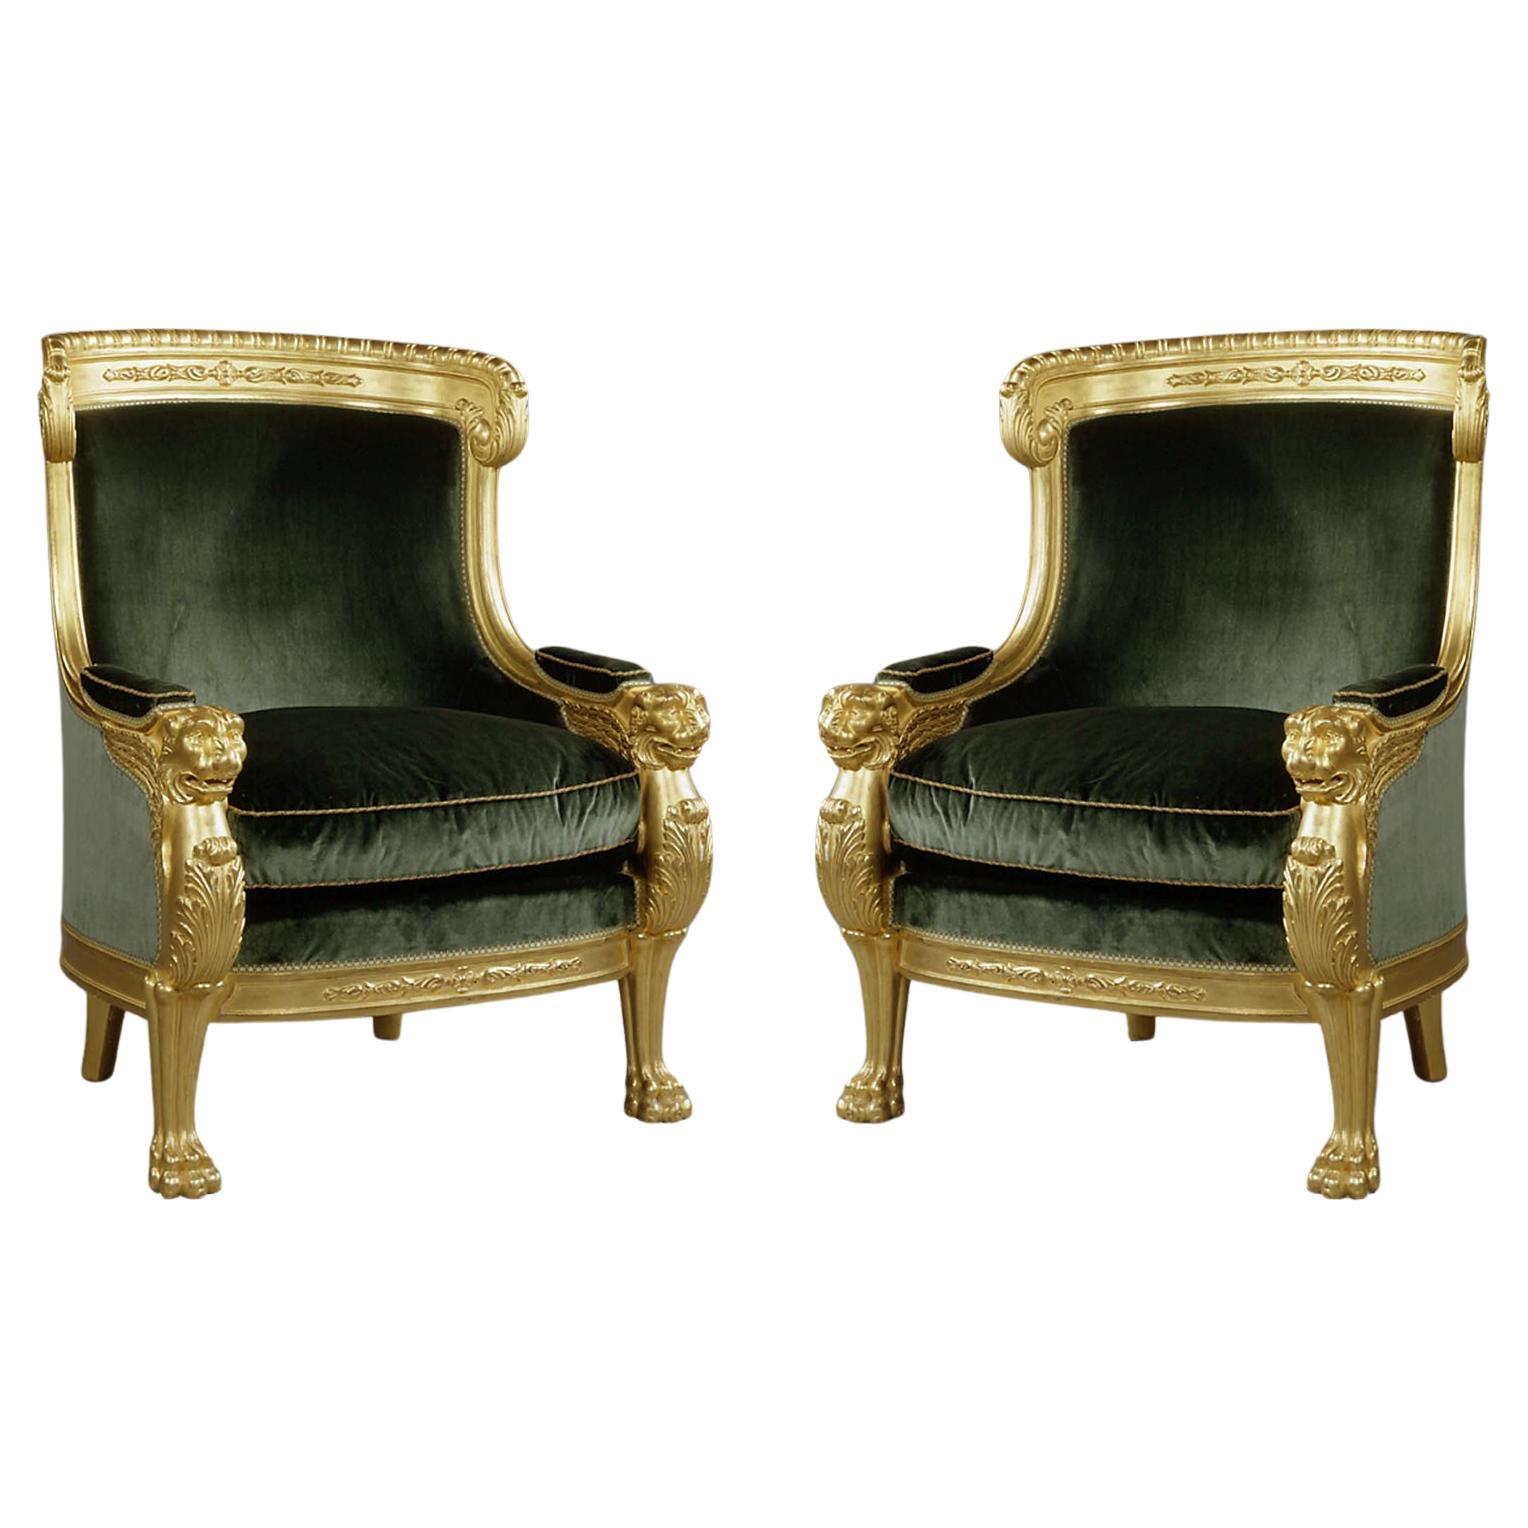 Pair of Empire Style Carved Giltwood Tub Chairs with Green Velvet Upholstery. For Sale